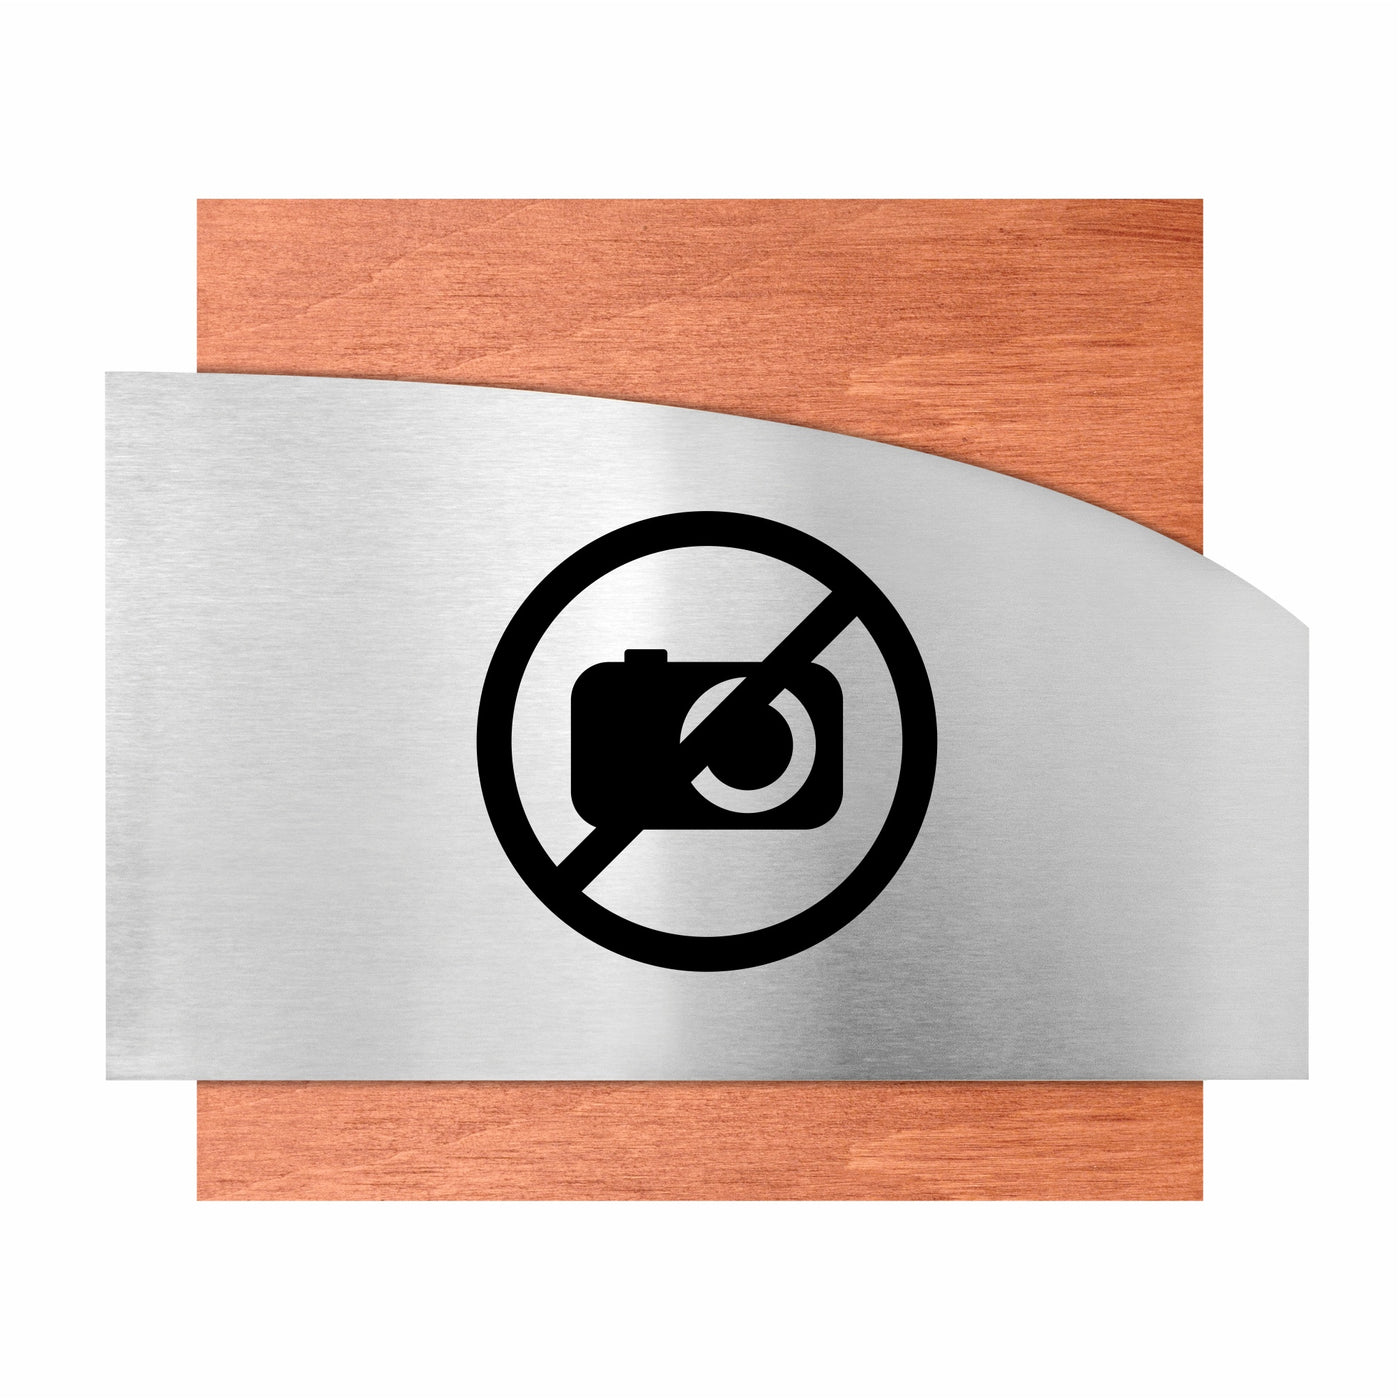 Wooden No Photography Sign - "Wave" Design